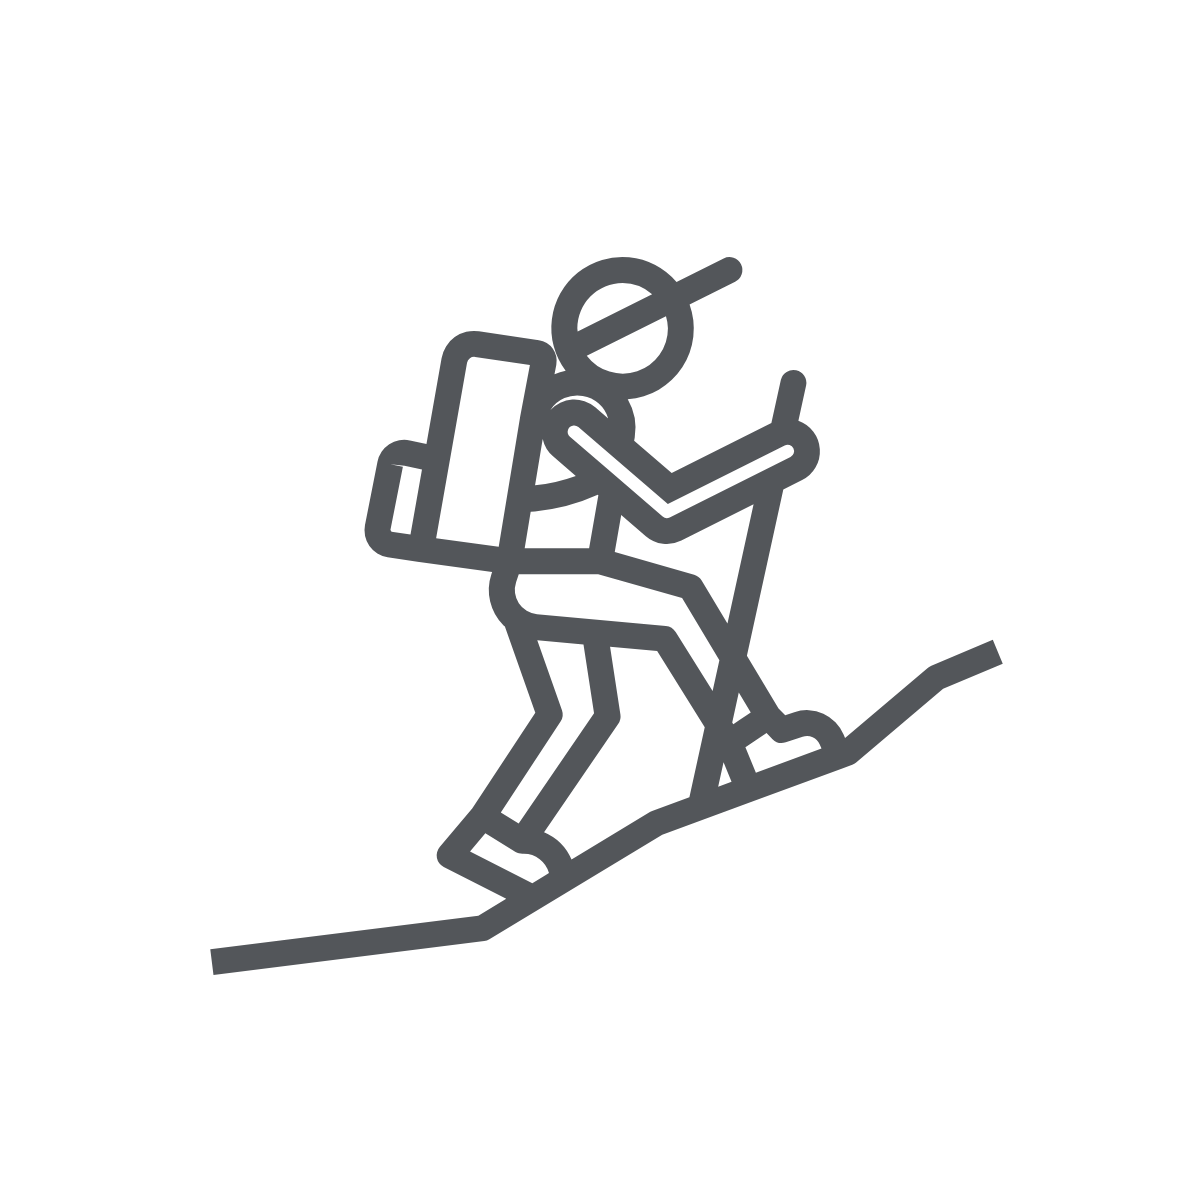 A grey icon of a person hiking up a hill with hiking gear. 